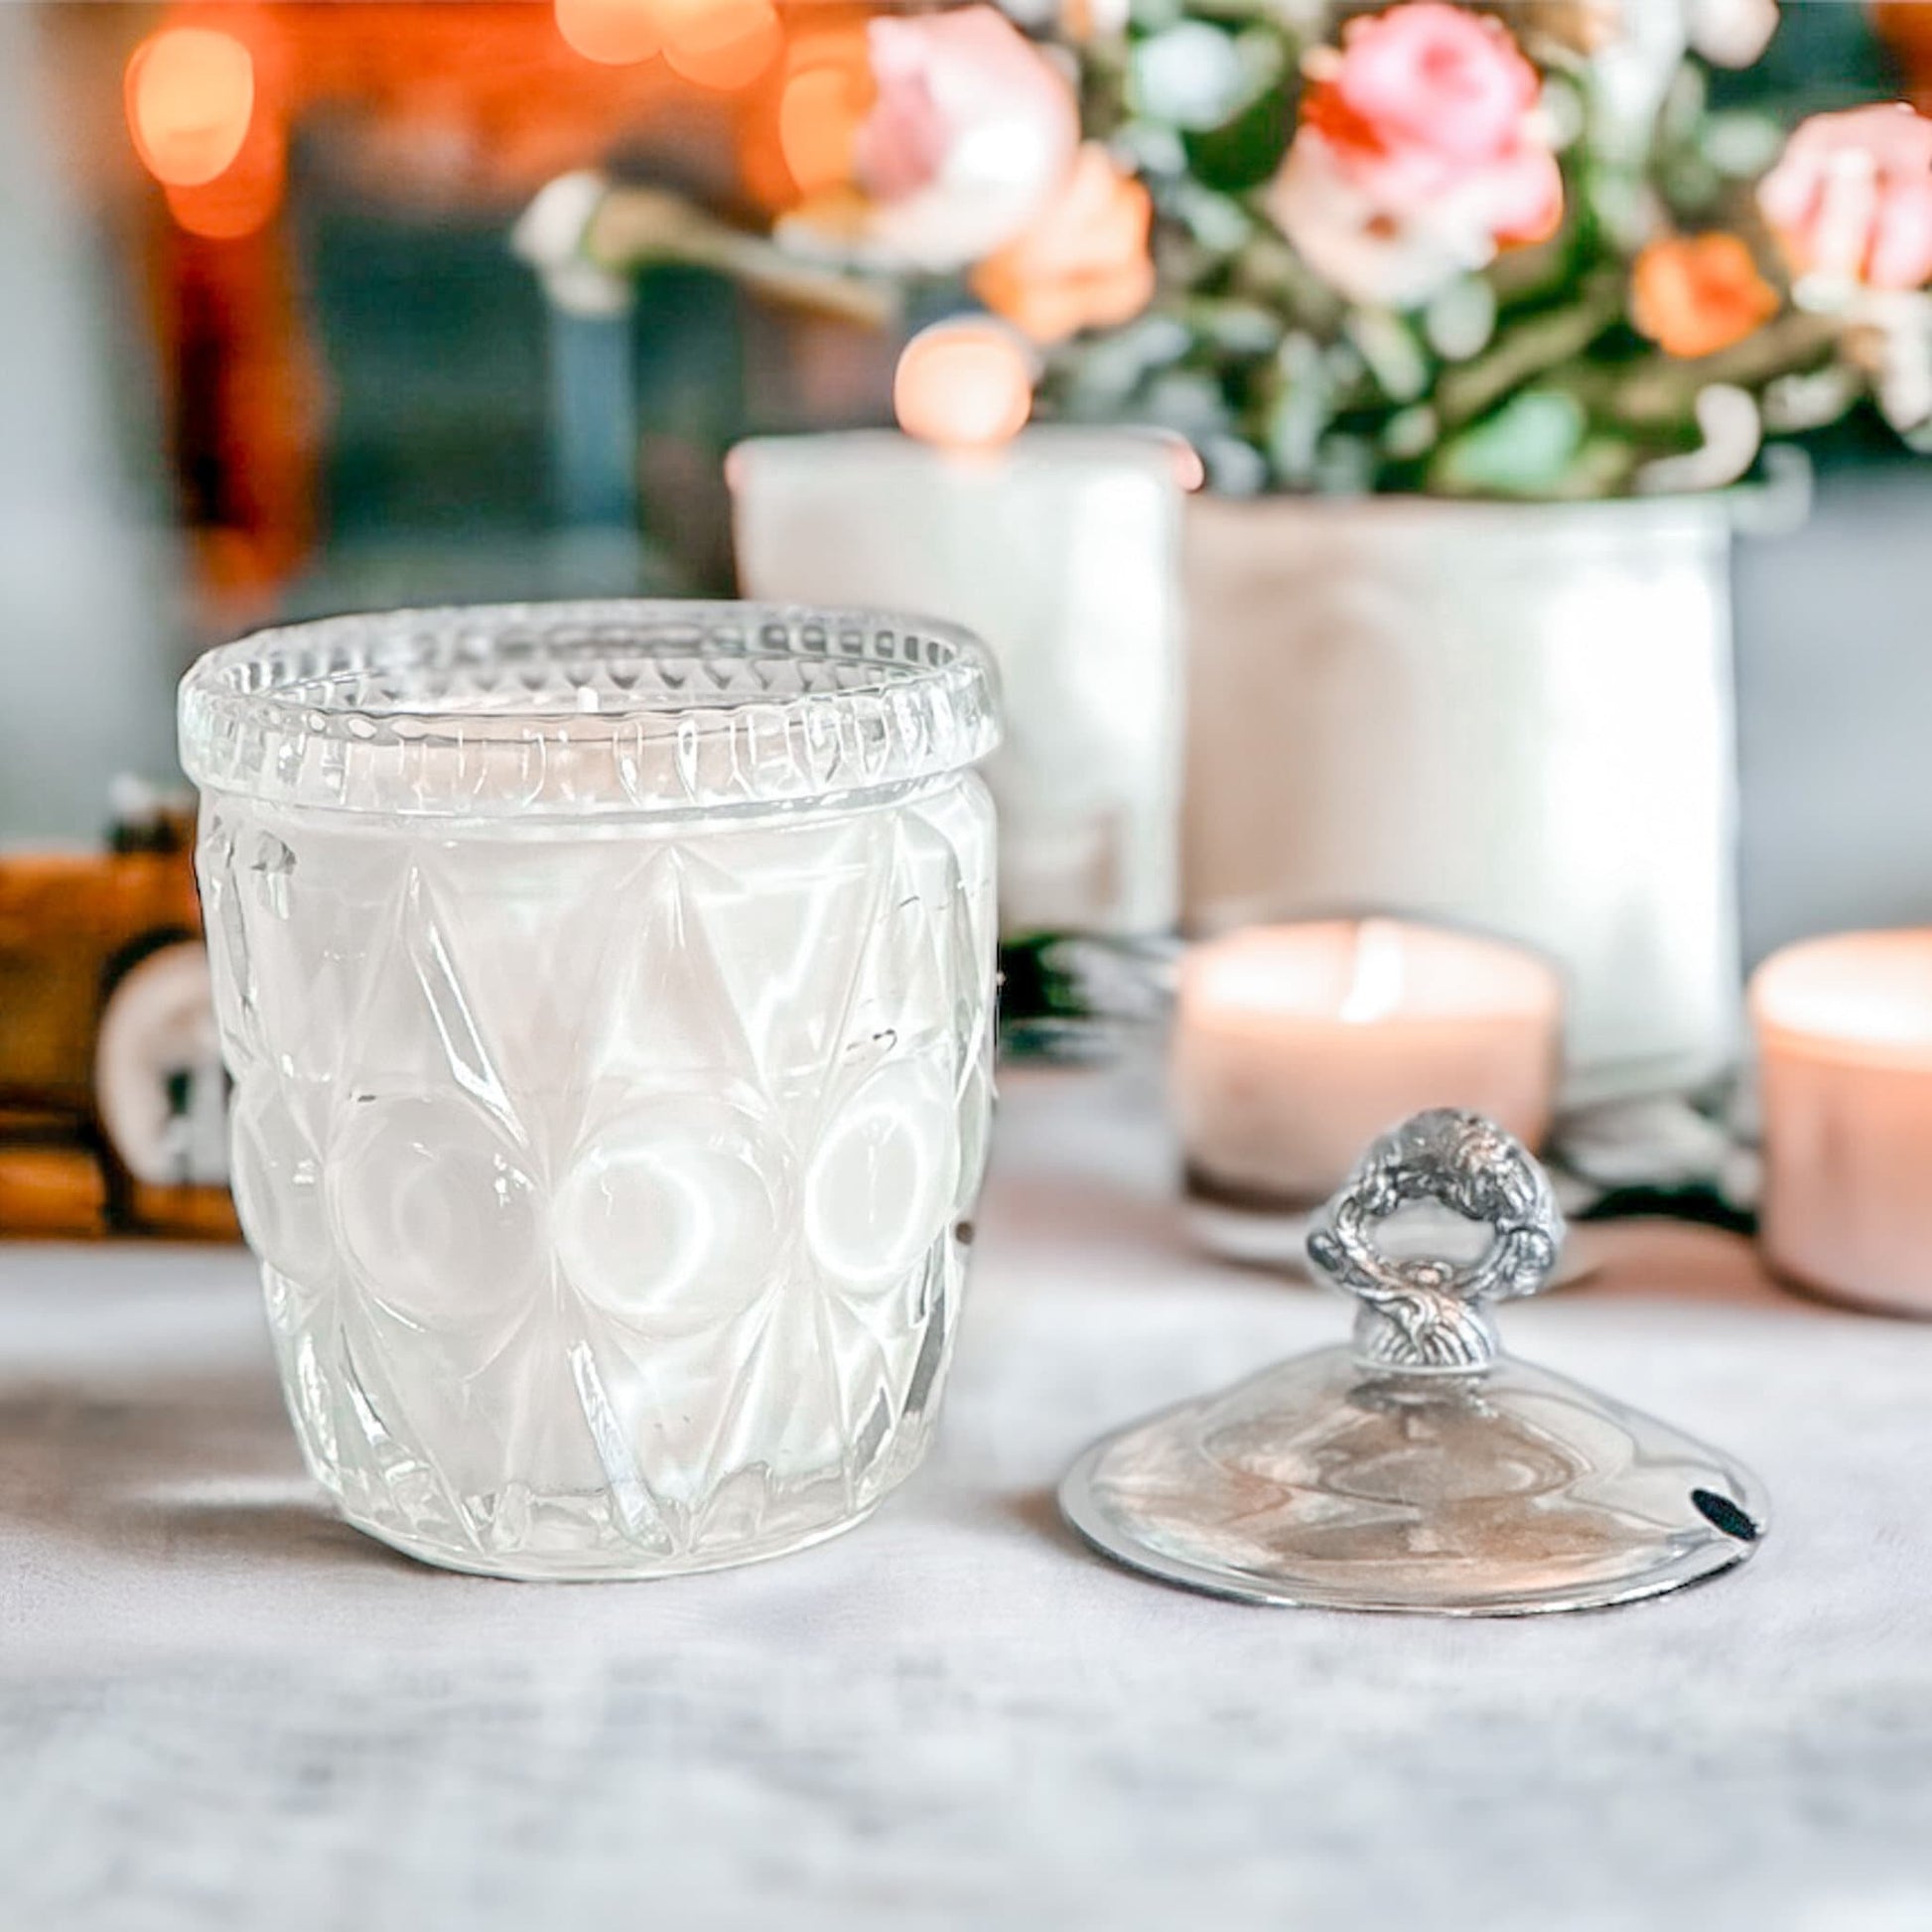 Gardenia Tuberose Candle in Vintage Glass Sugar Dish with Silver Lid